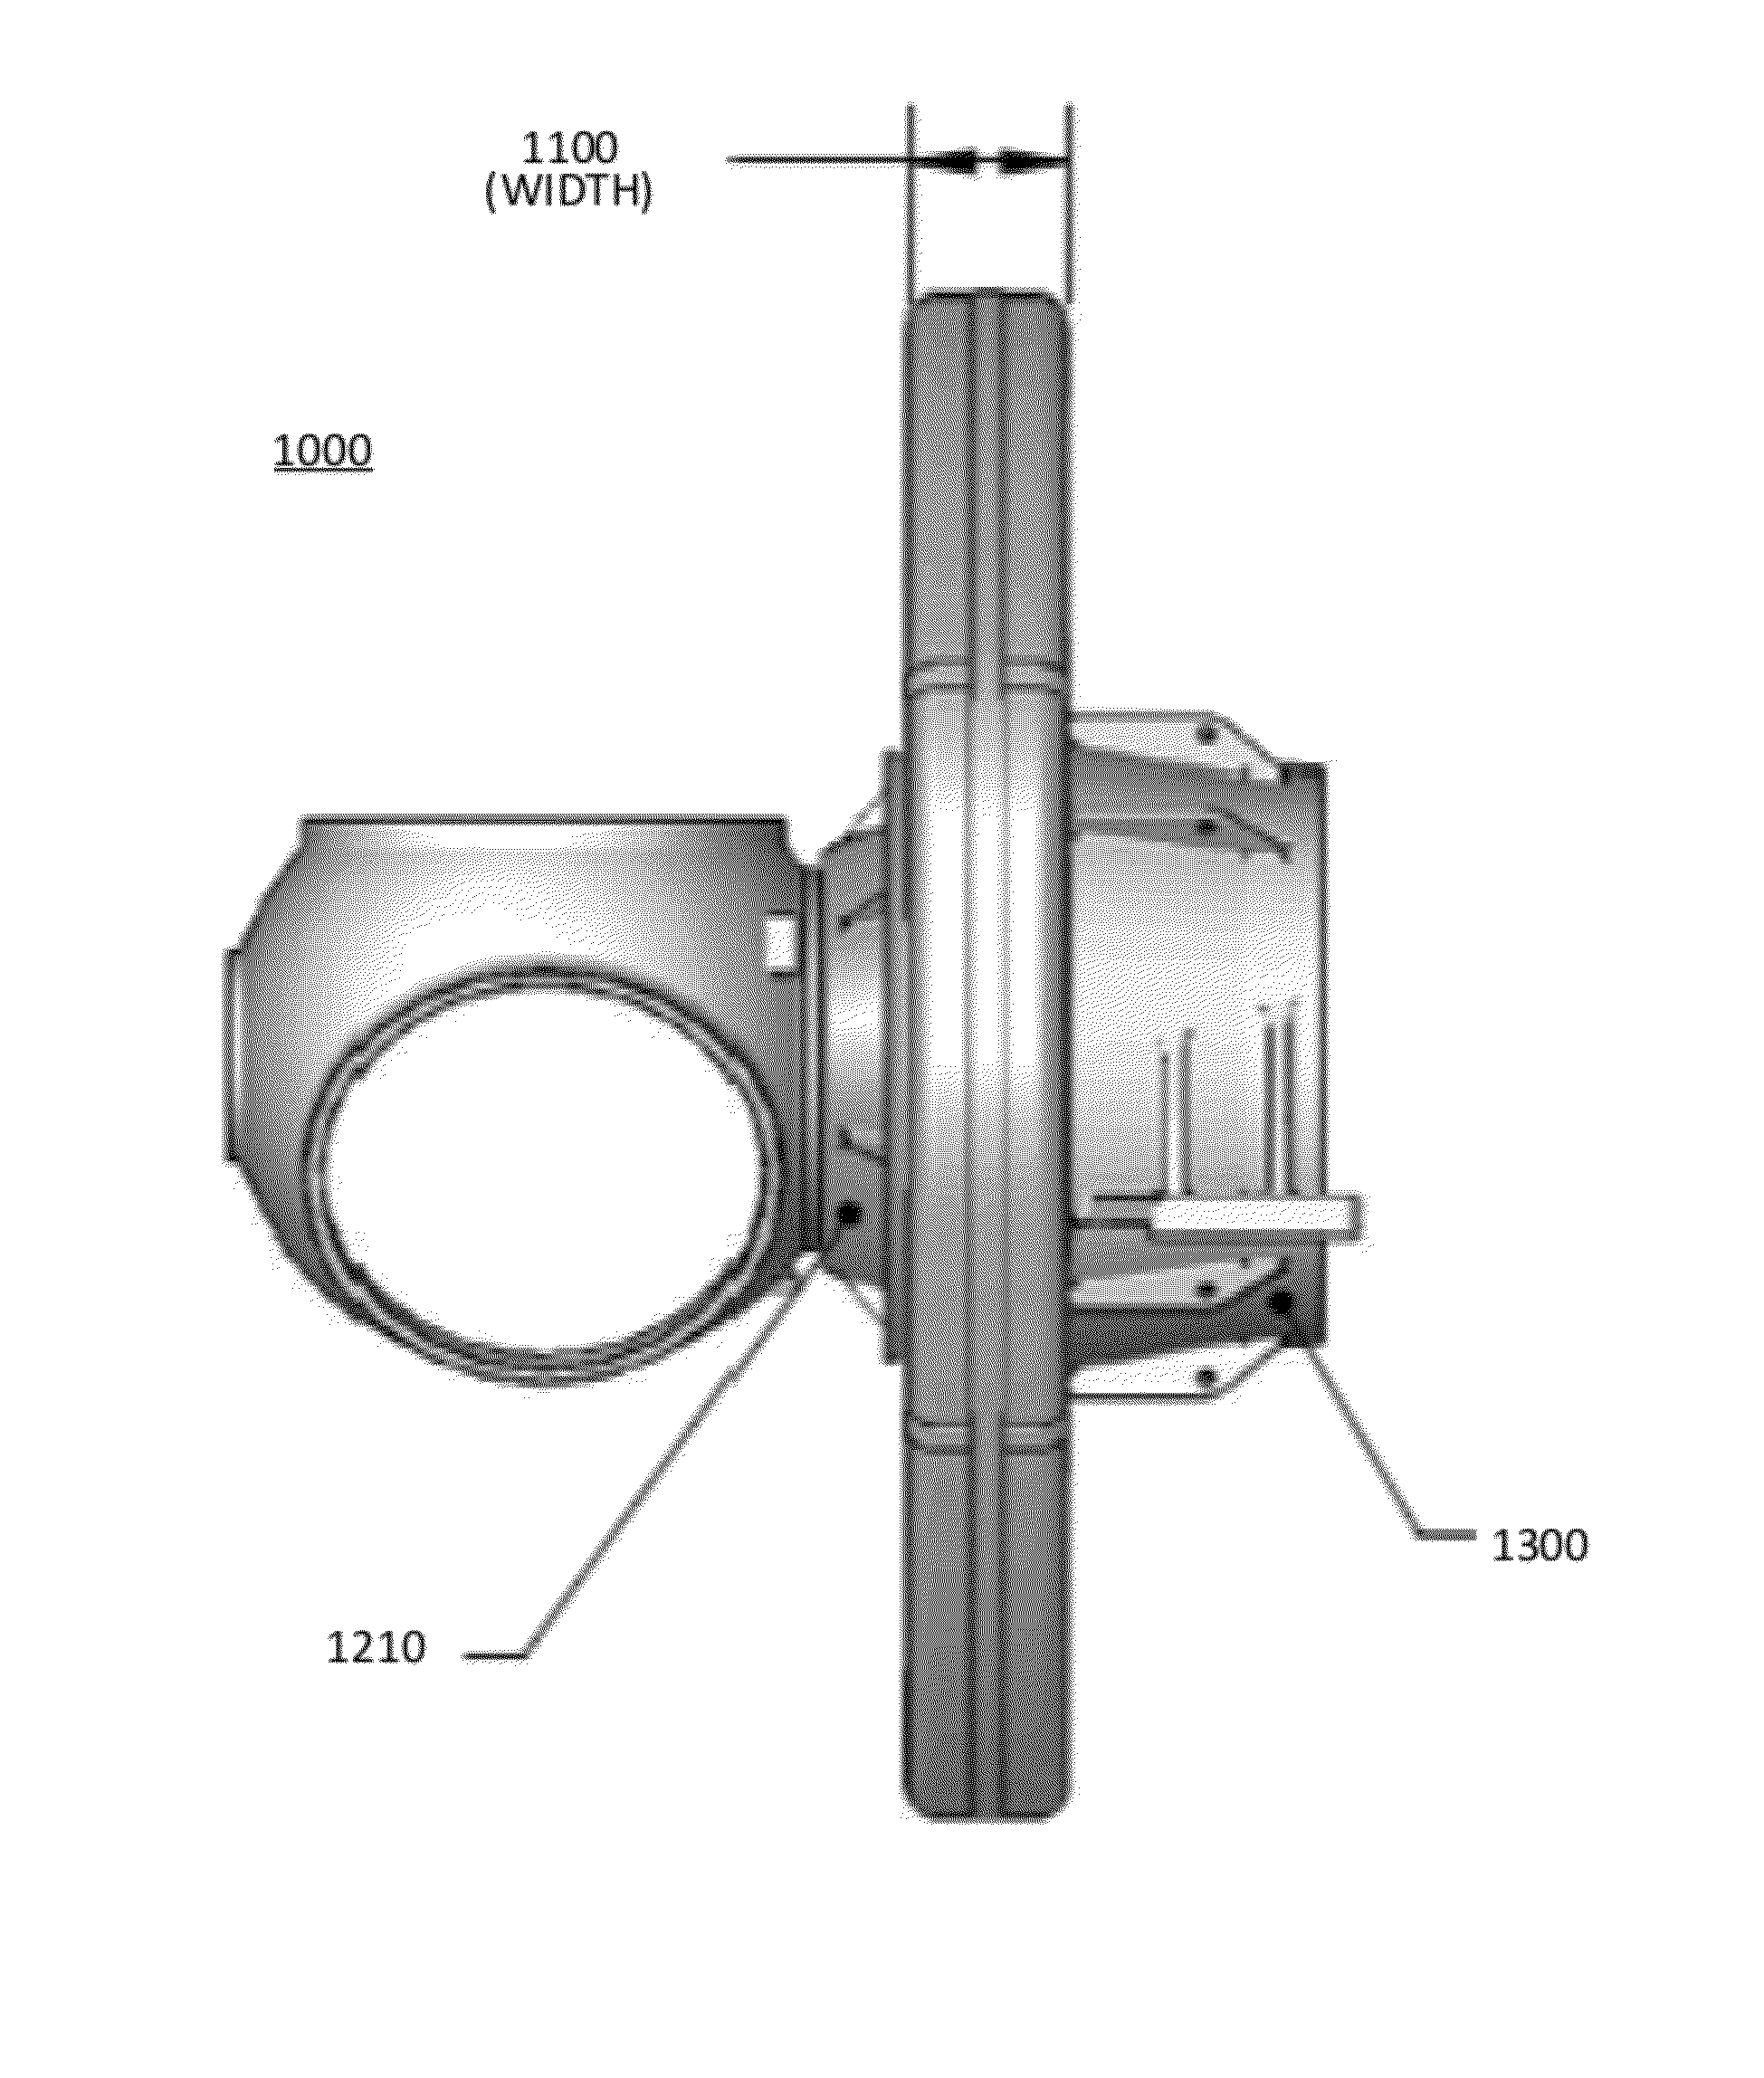 Systems and methods for improved direct drive generators